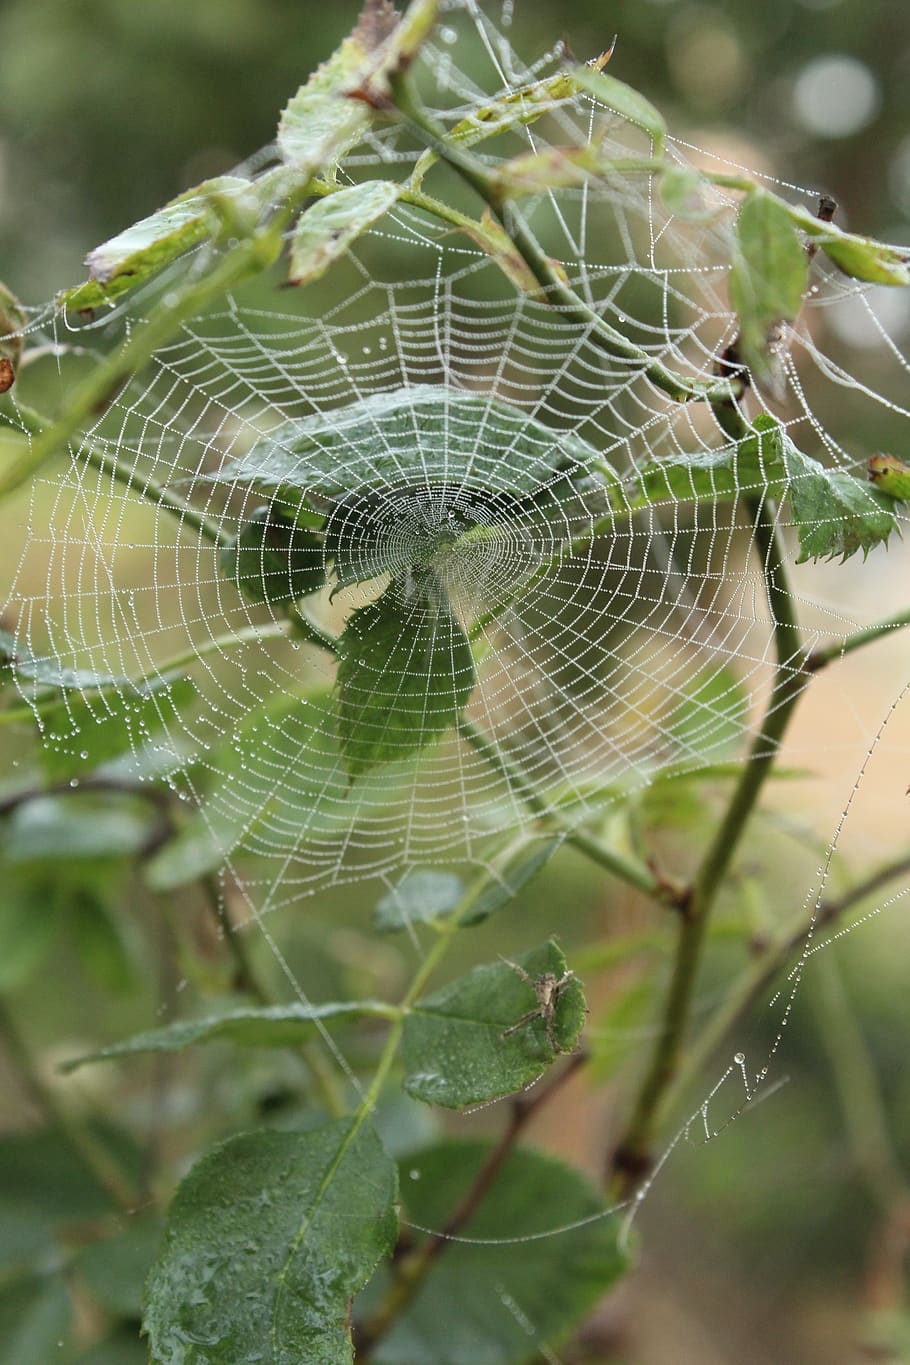 spiderweb, spider, web, green, spider web, fragility, close-up, vulnerability, focus on foreground, animal themes